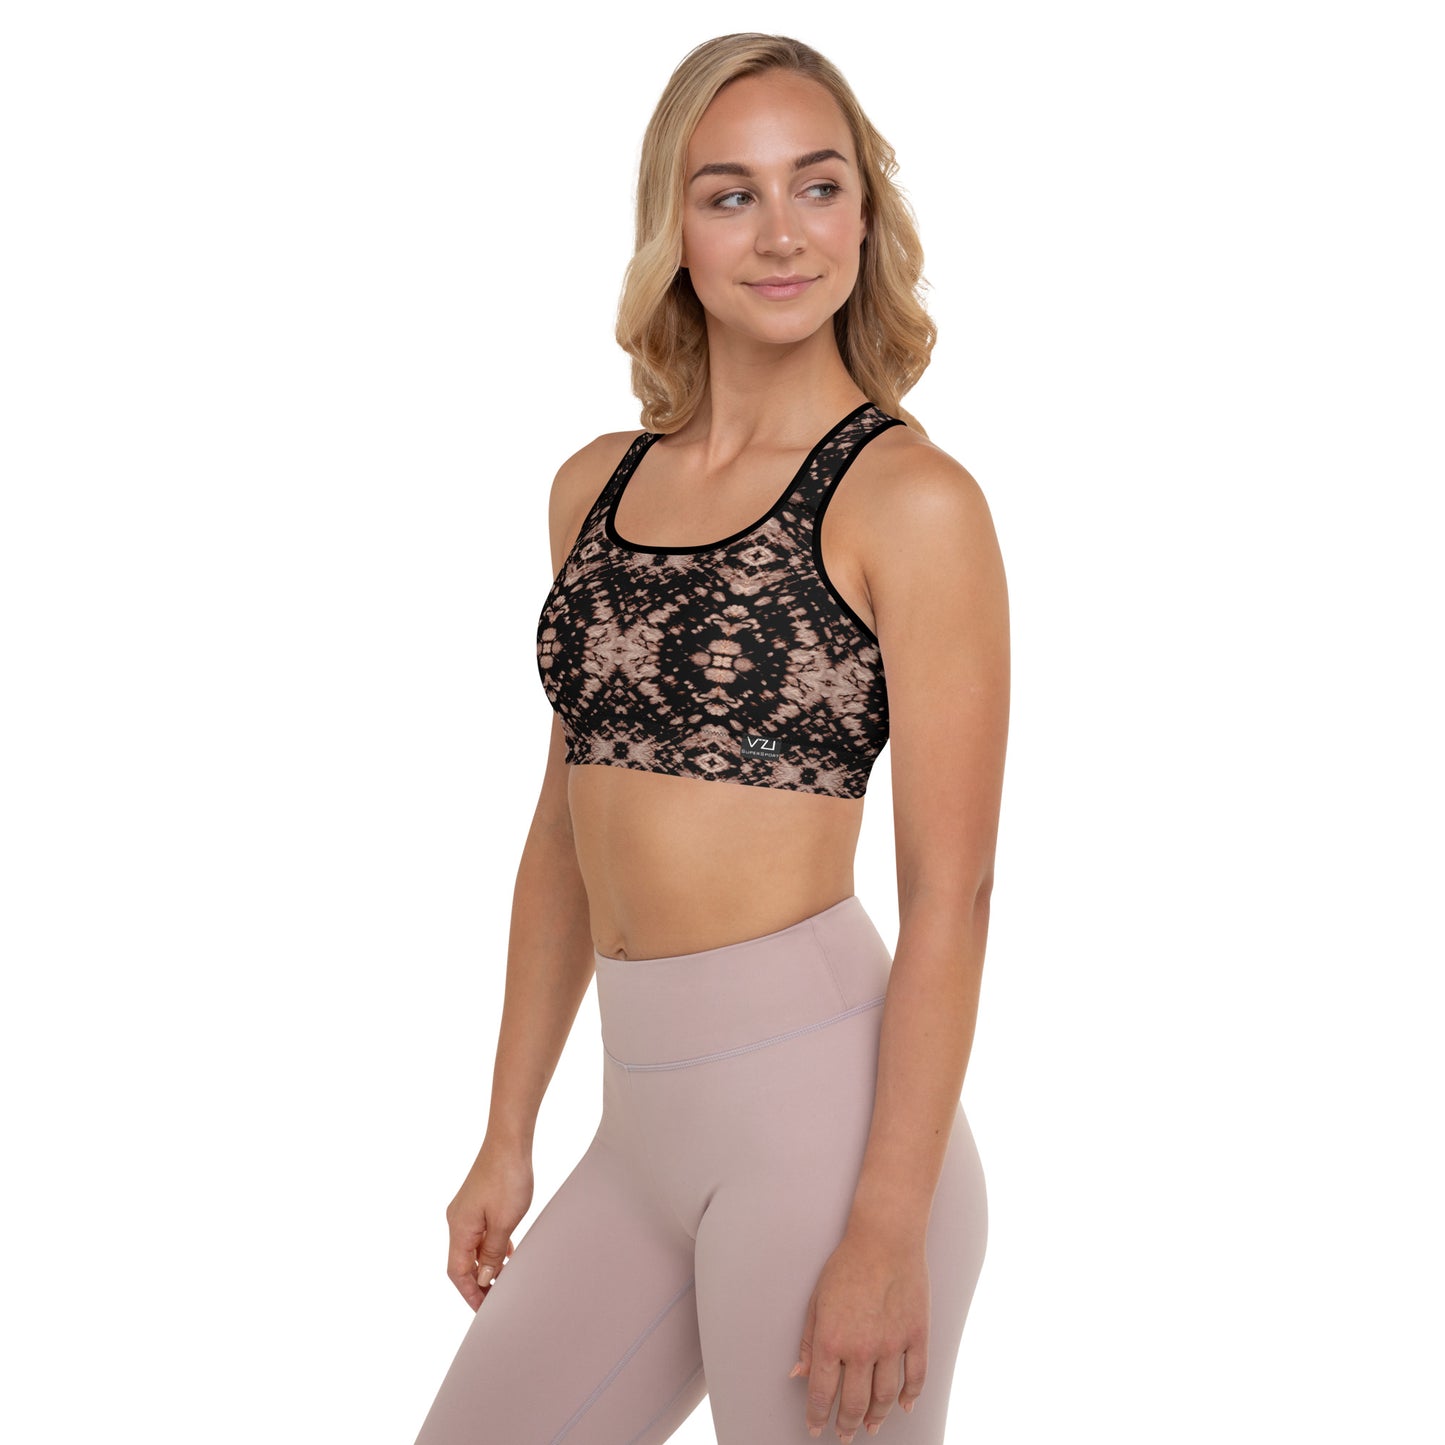 Bordeaux Enclave - Padded Sports Bra: Removable Padding, Scoop neckline and racerback